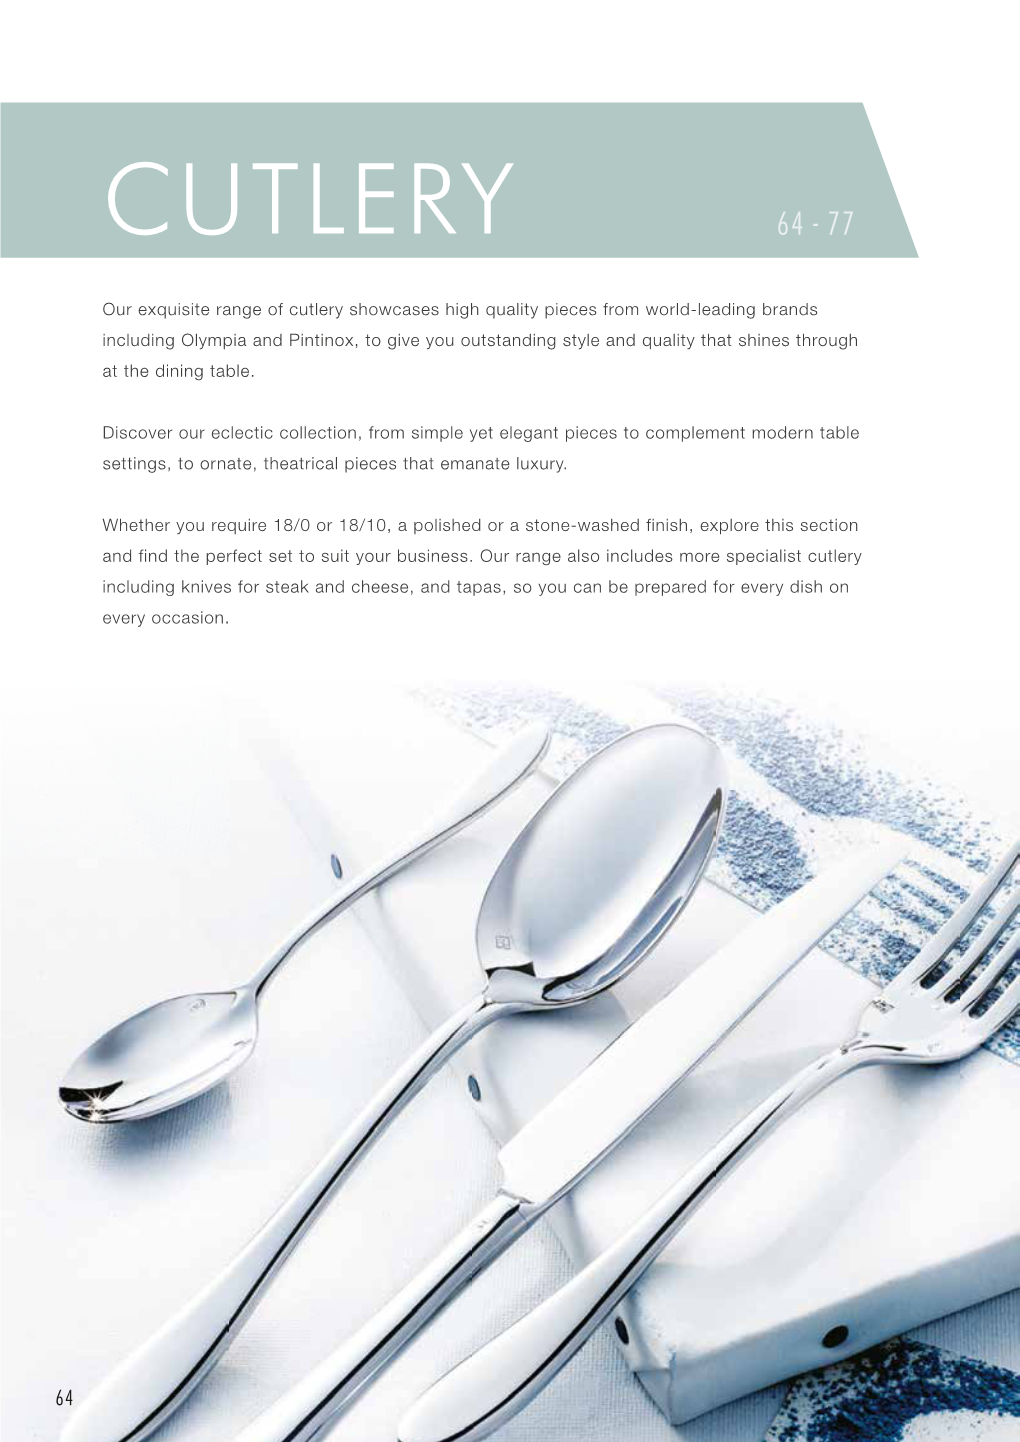 Cutlery Intro Page with Lifestly & Contents Cutlery 64 - 77